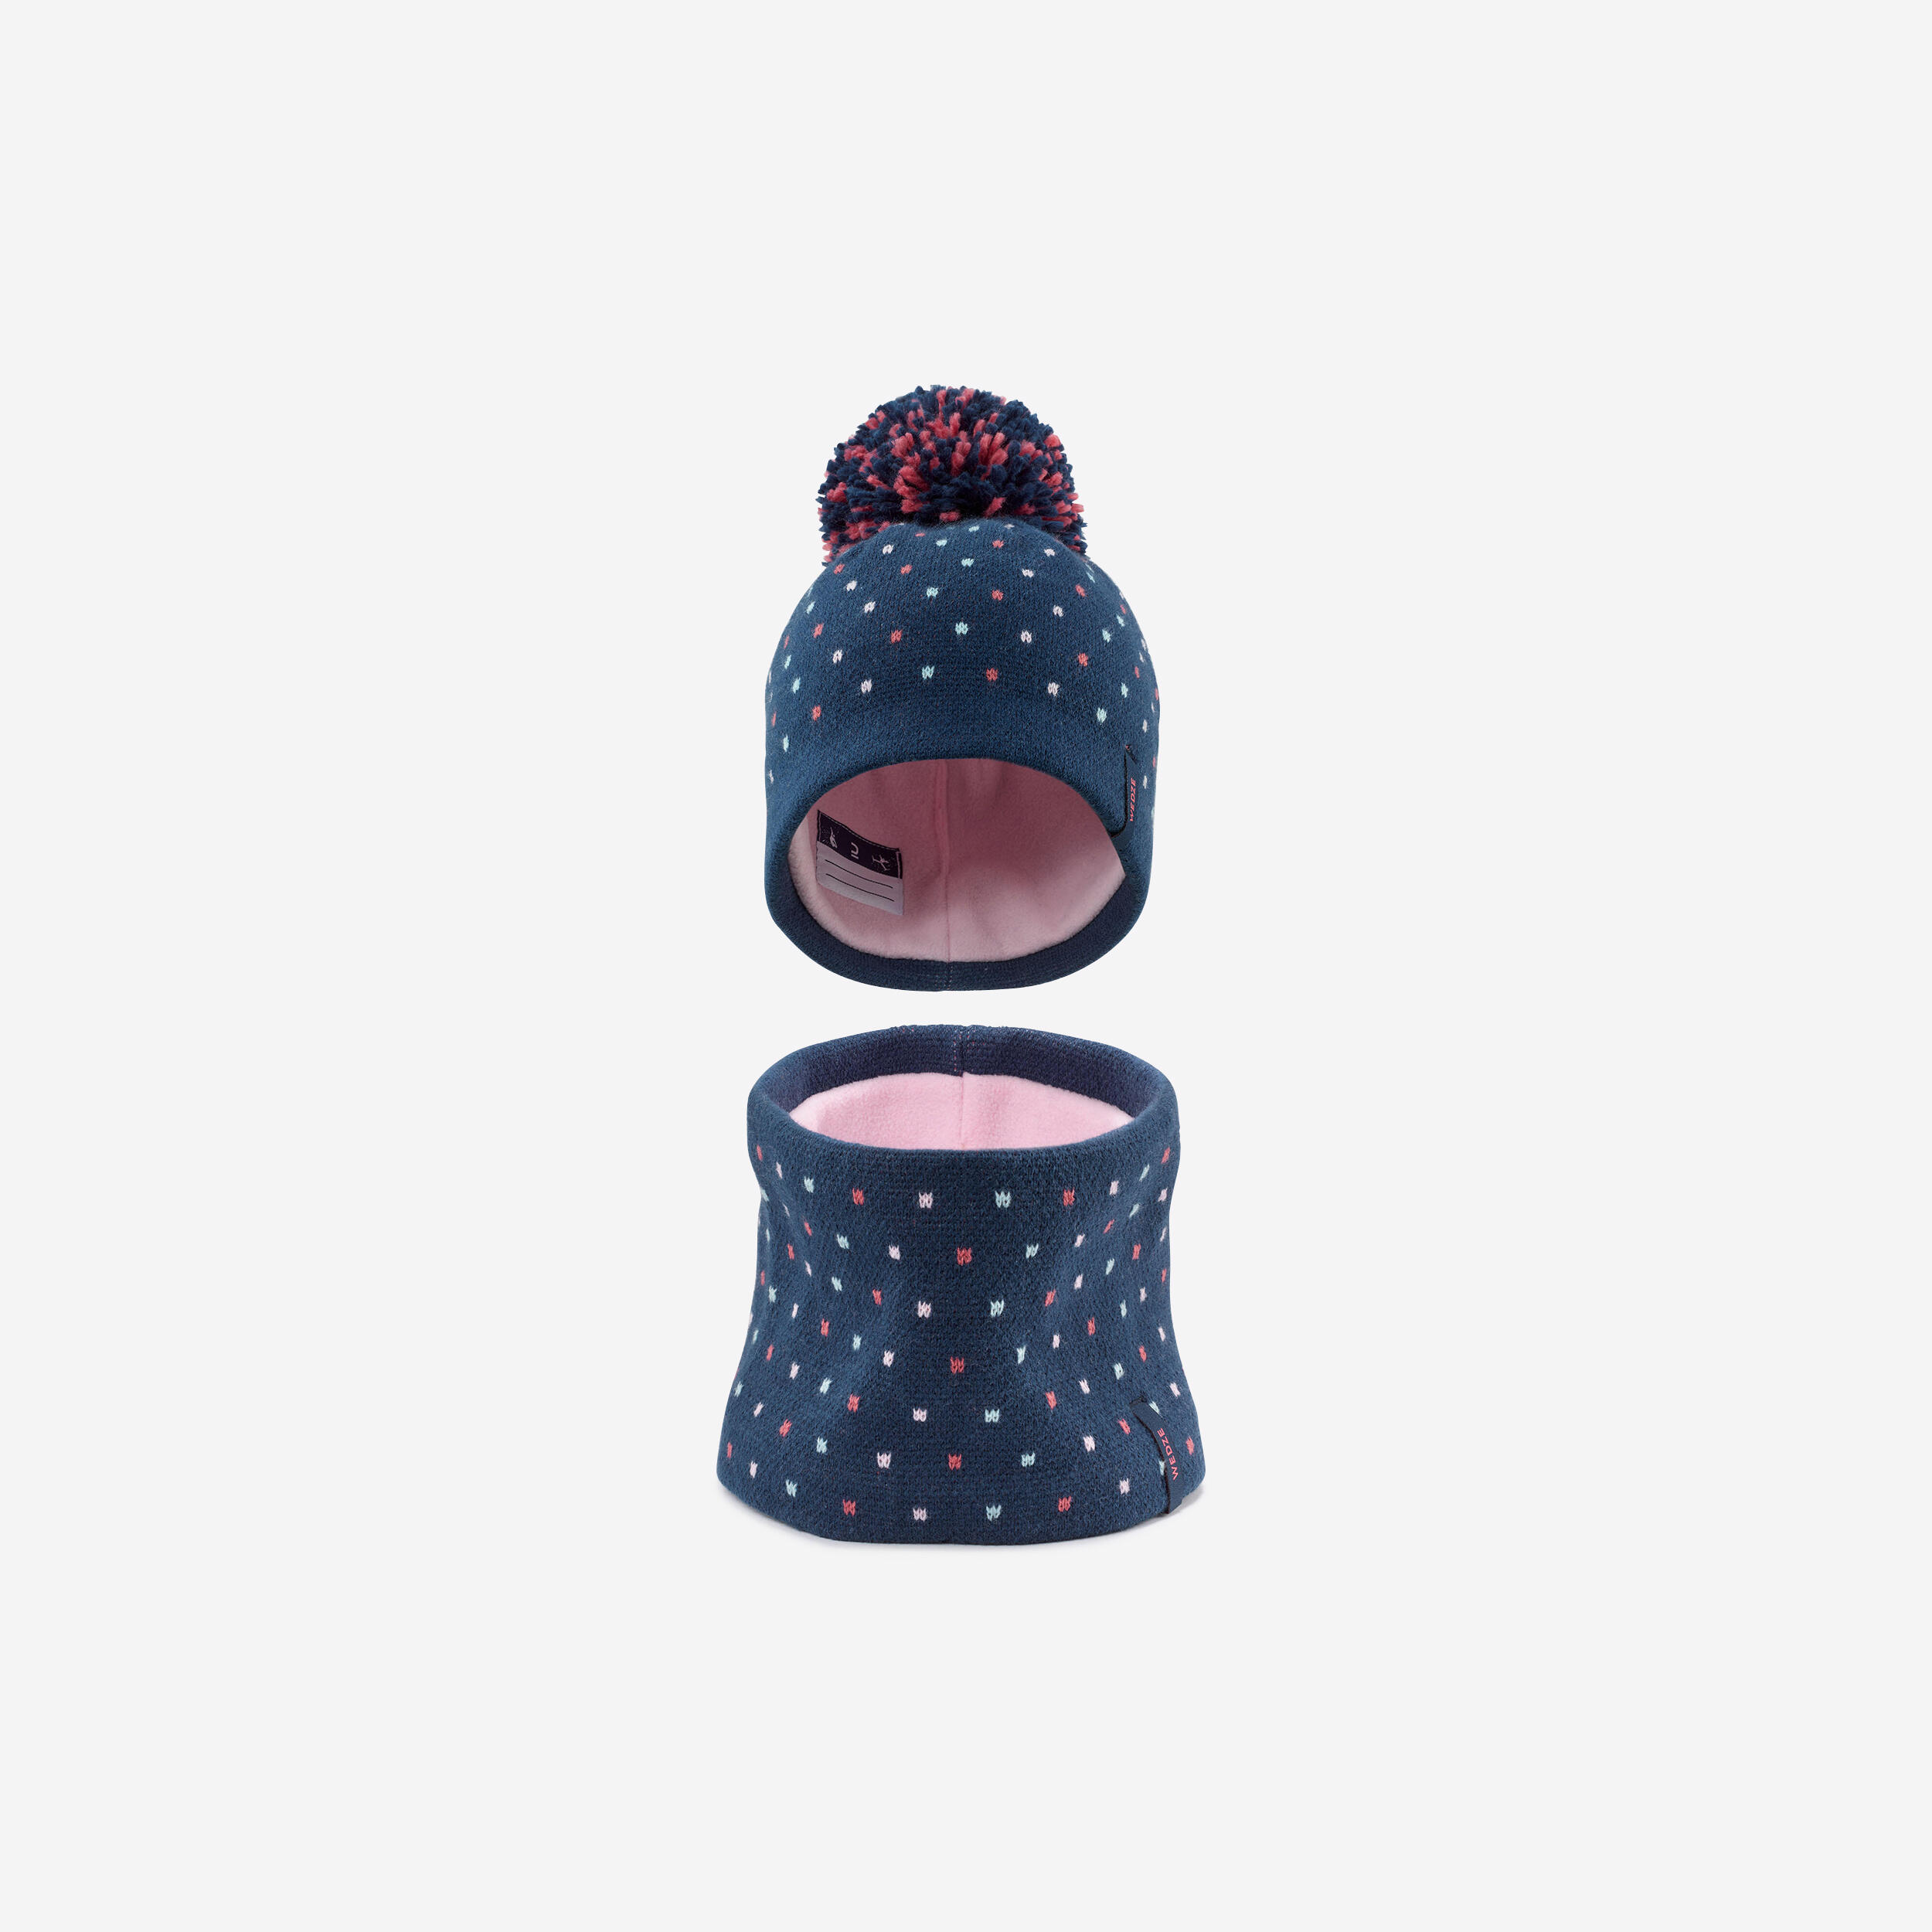 WEDZE Baby Ski/Sledge Hat and Snood - WARM Navy Blue and Pink Spots